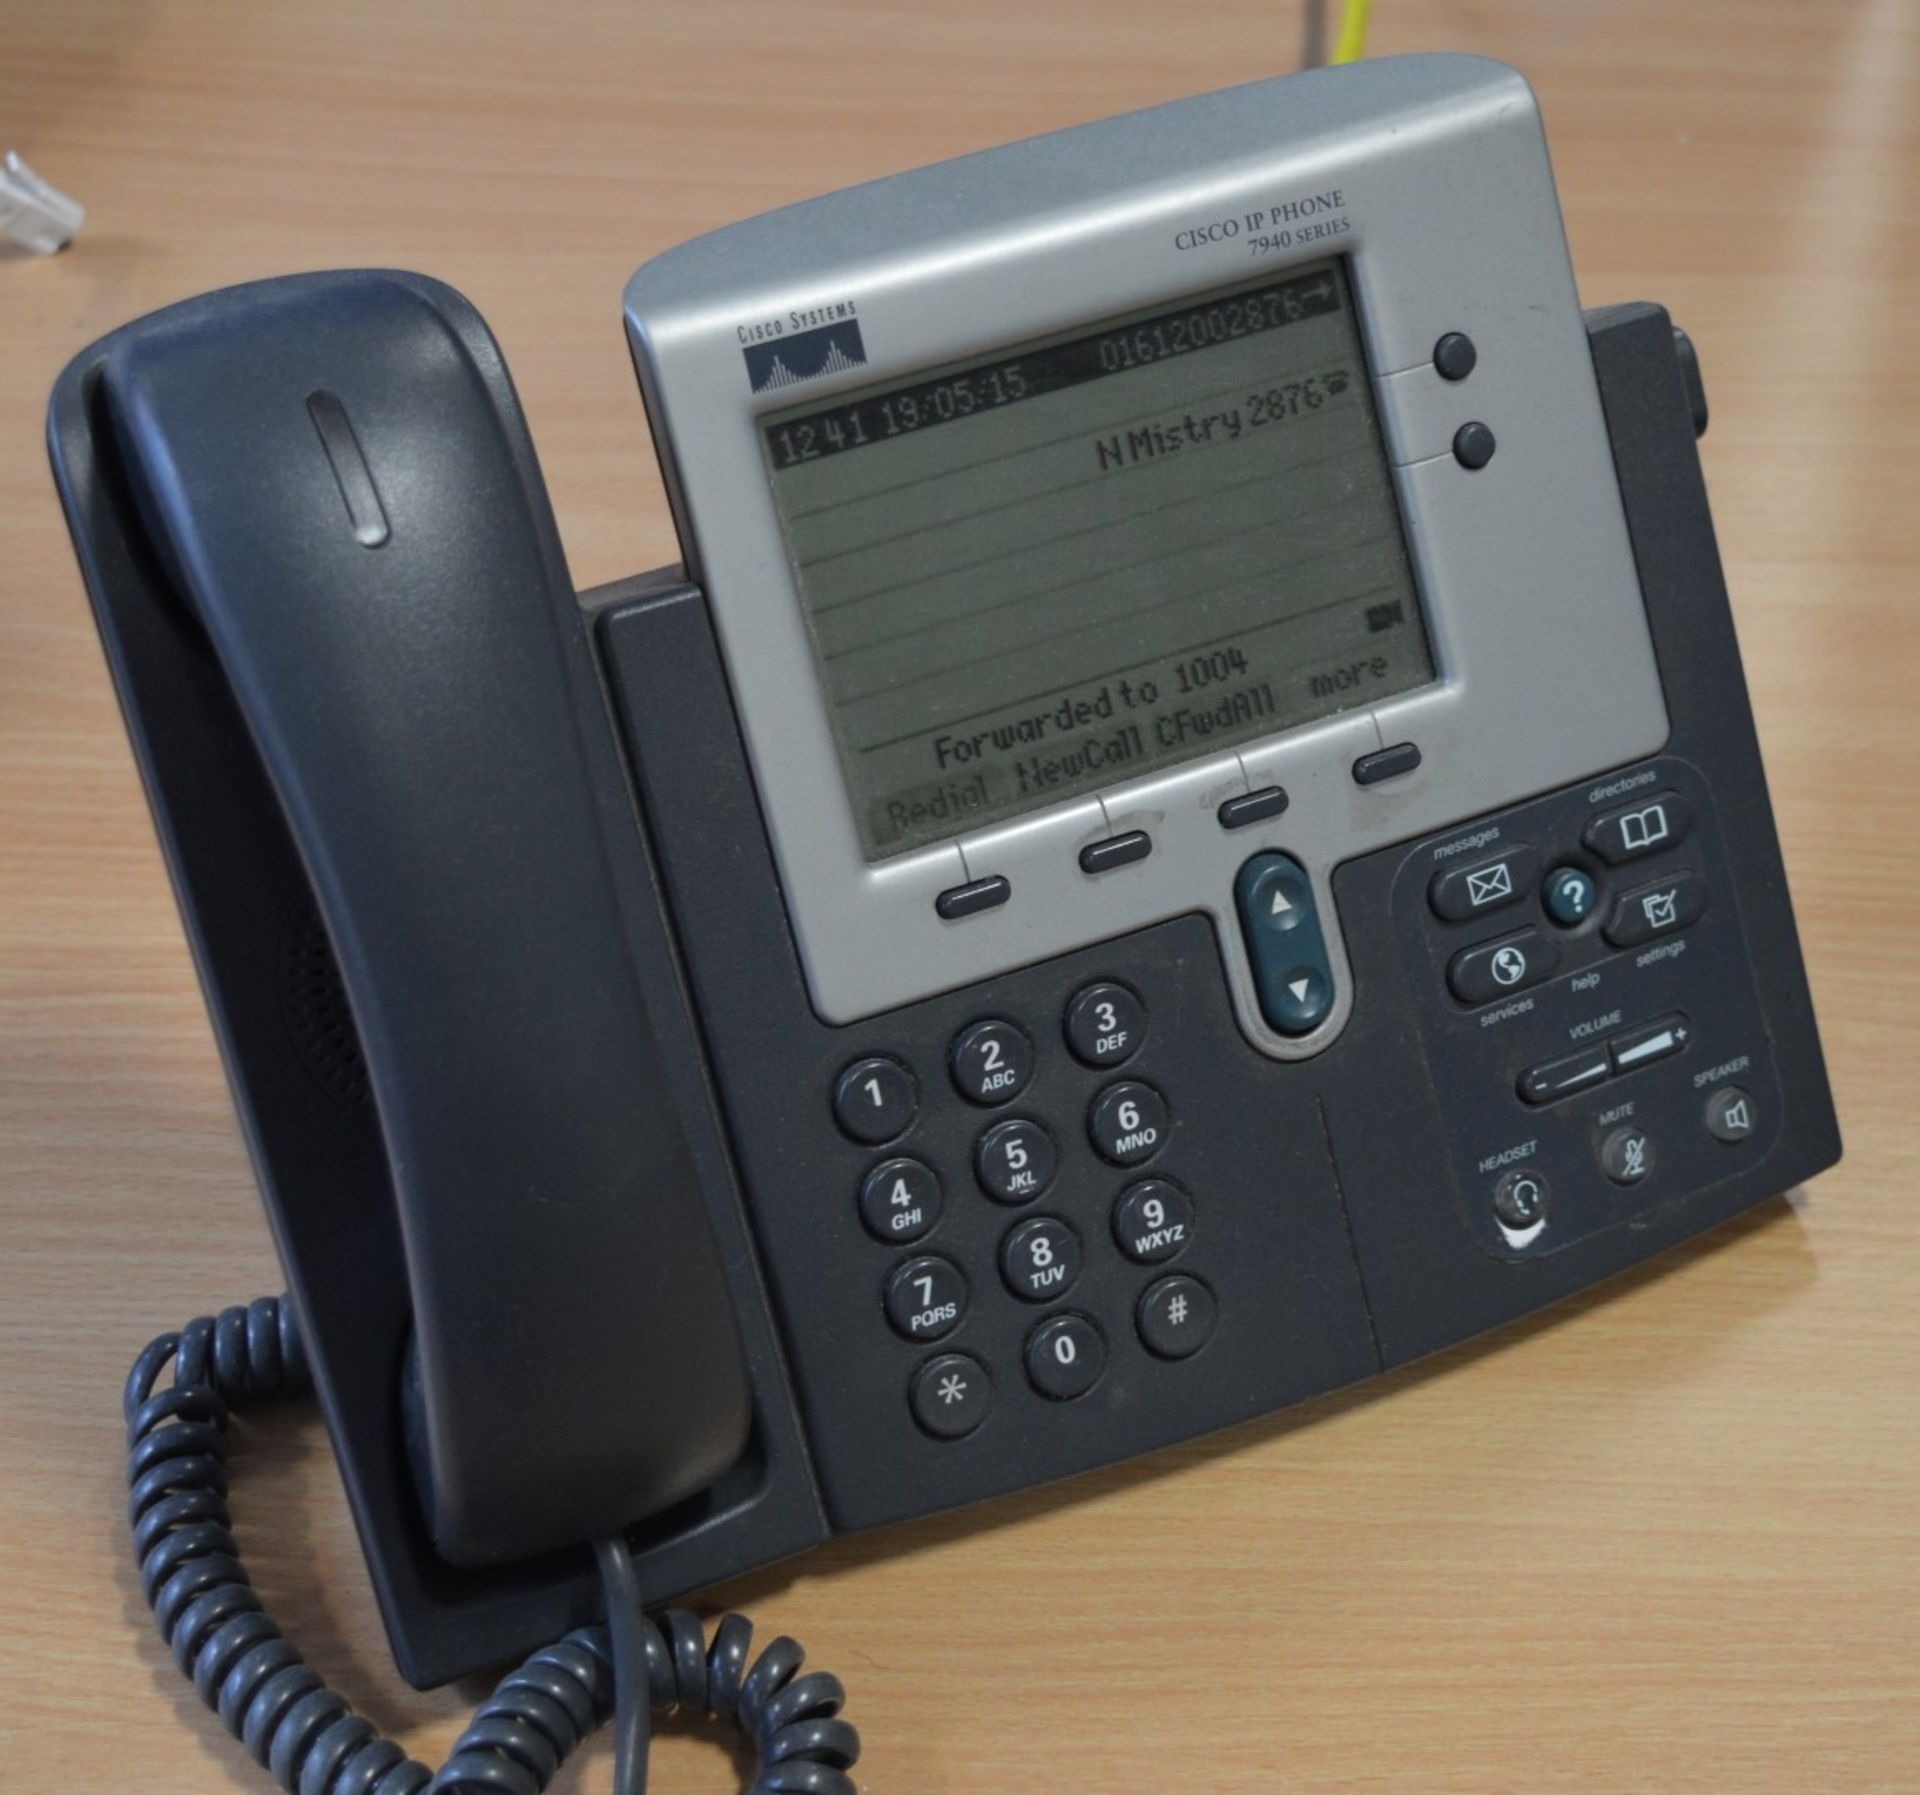 4 x Cisco 7940 Unified VoIP Business IP Phone Handsets - From Working Office Environment - Ref - Image 2 of 3